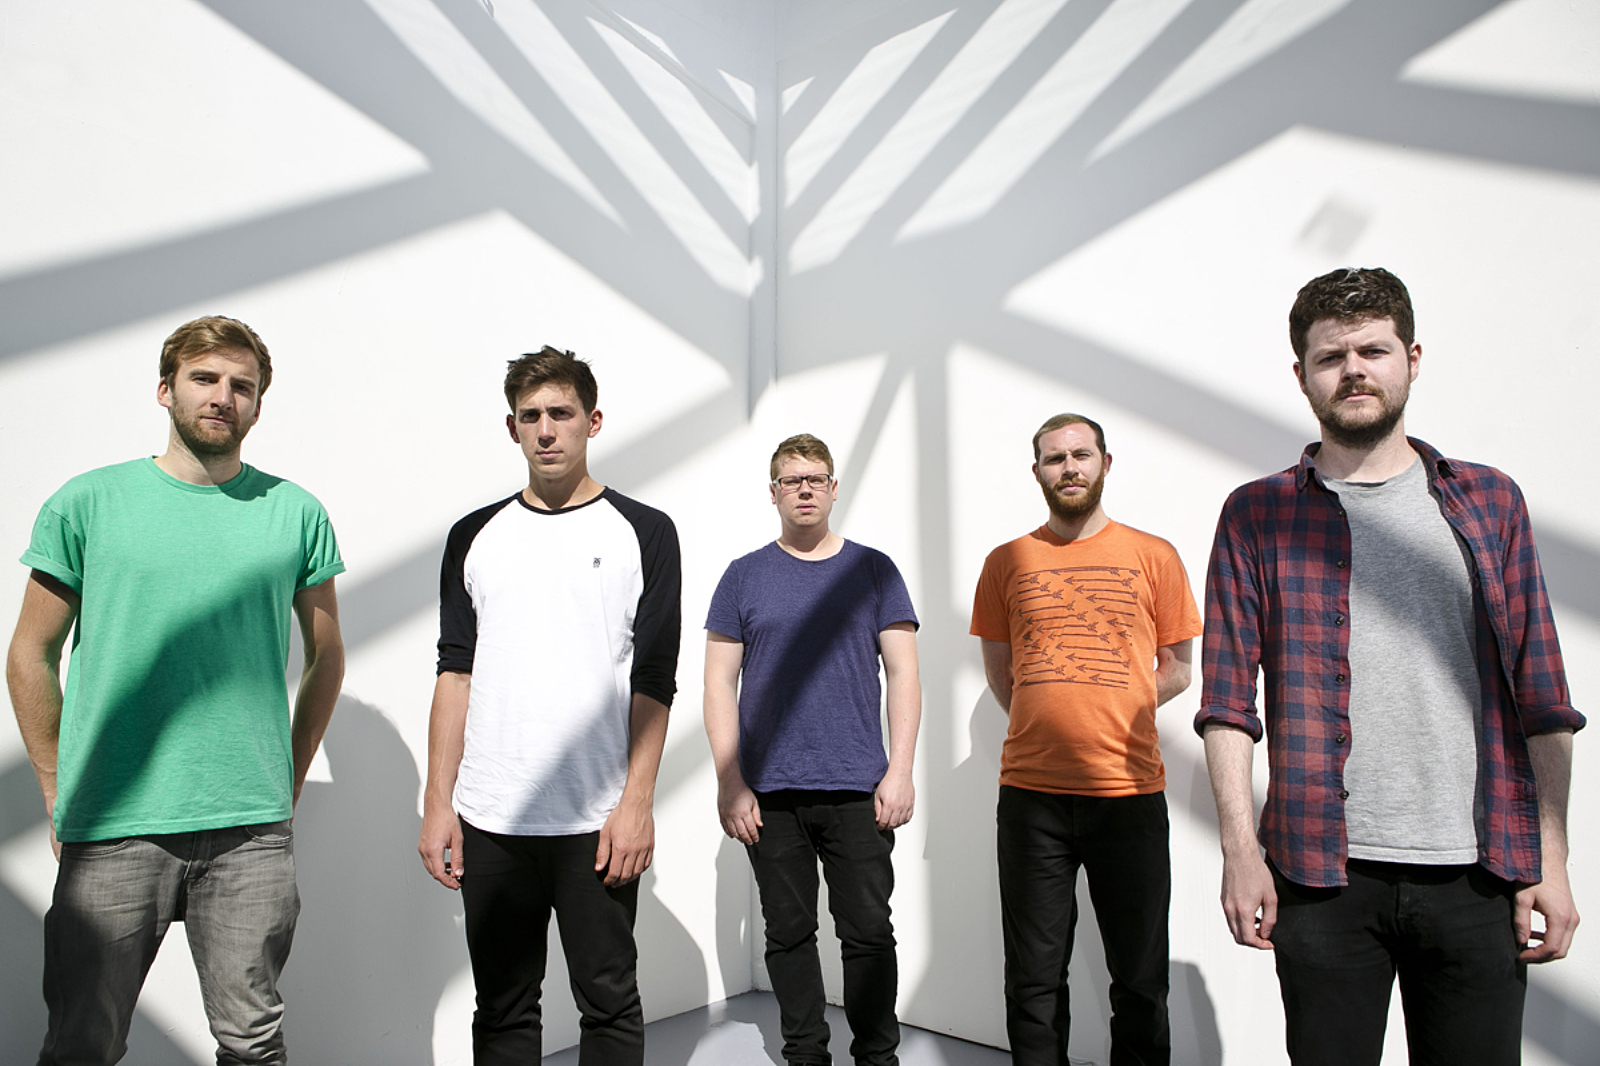 We Were Promised Jetpacks unveil new video for 'A Part Of It'